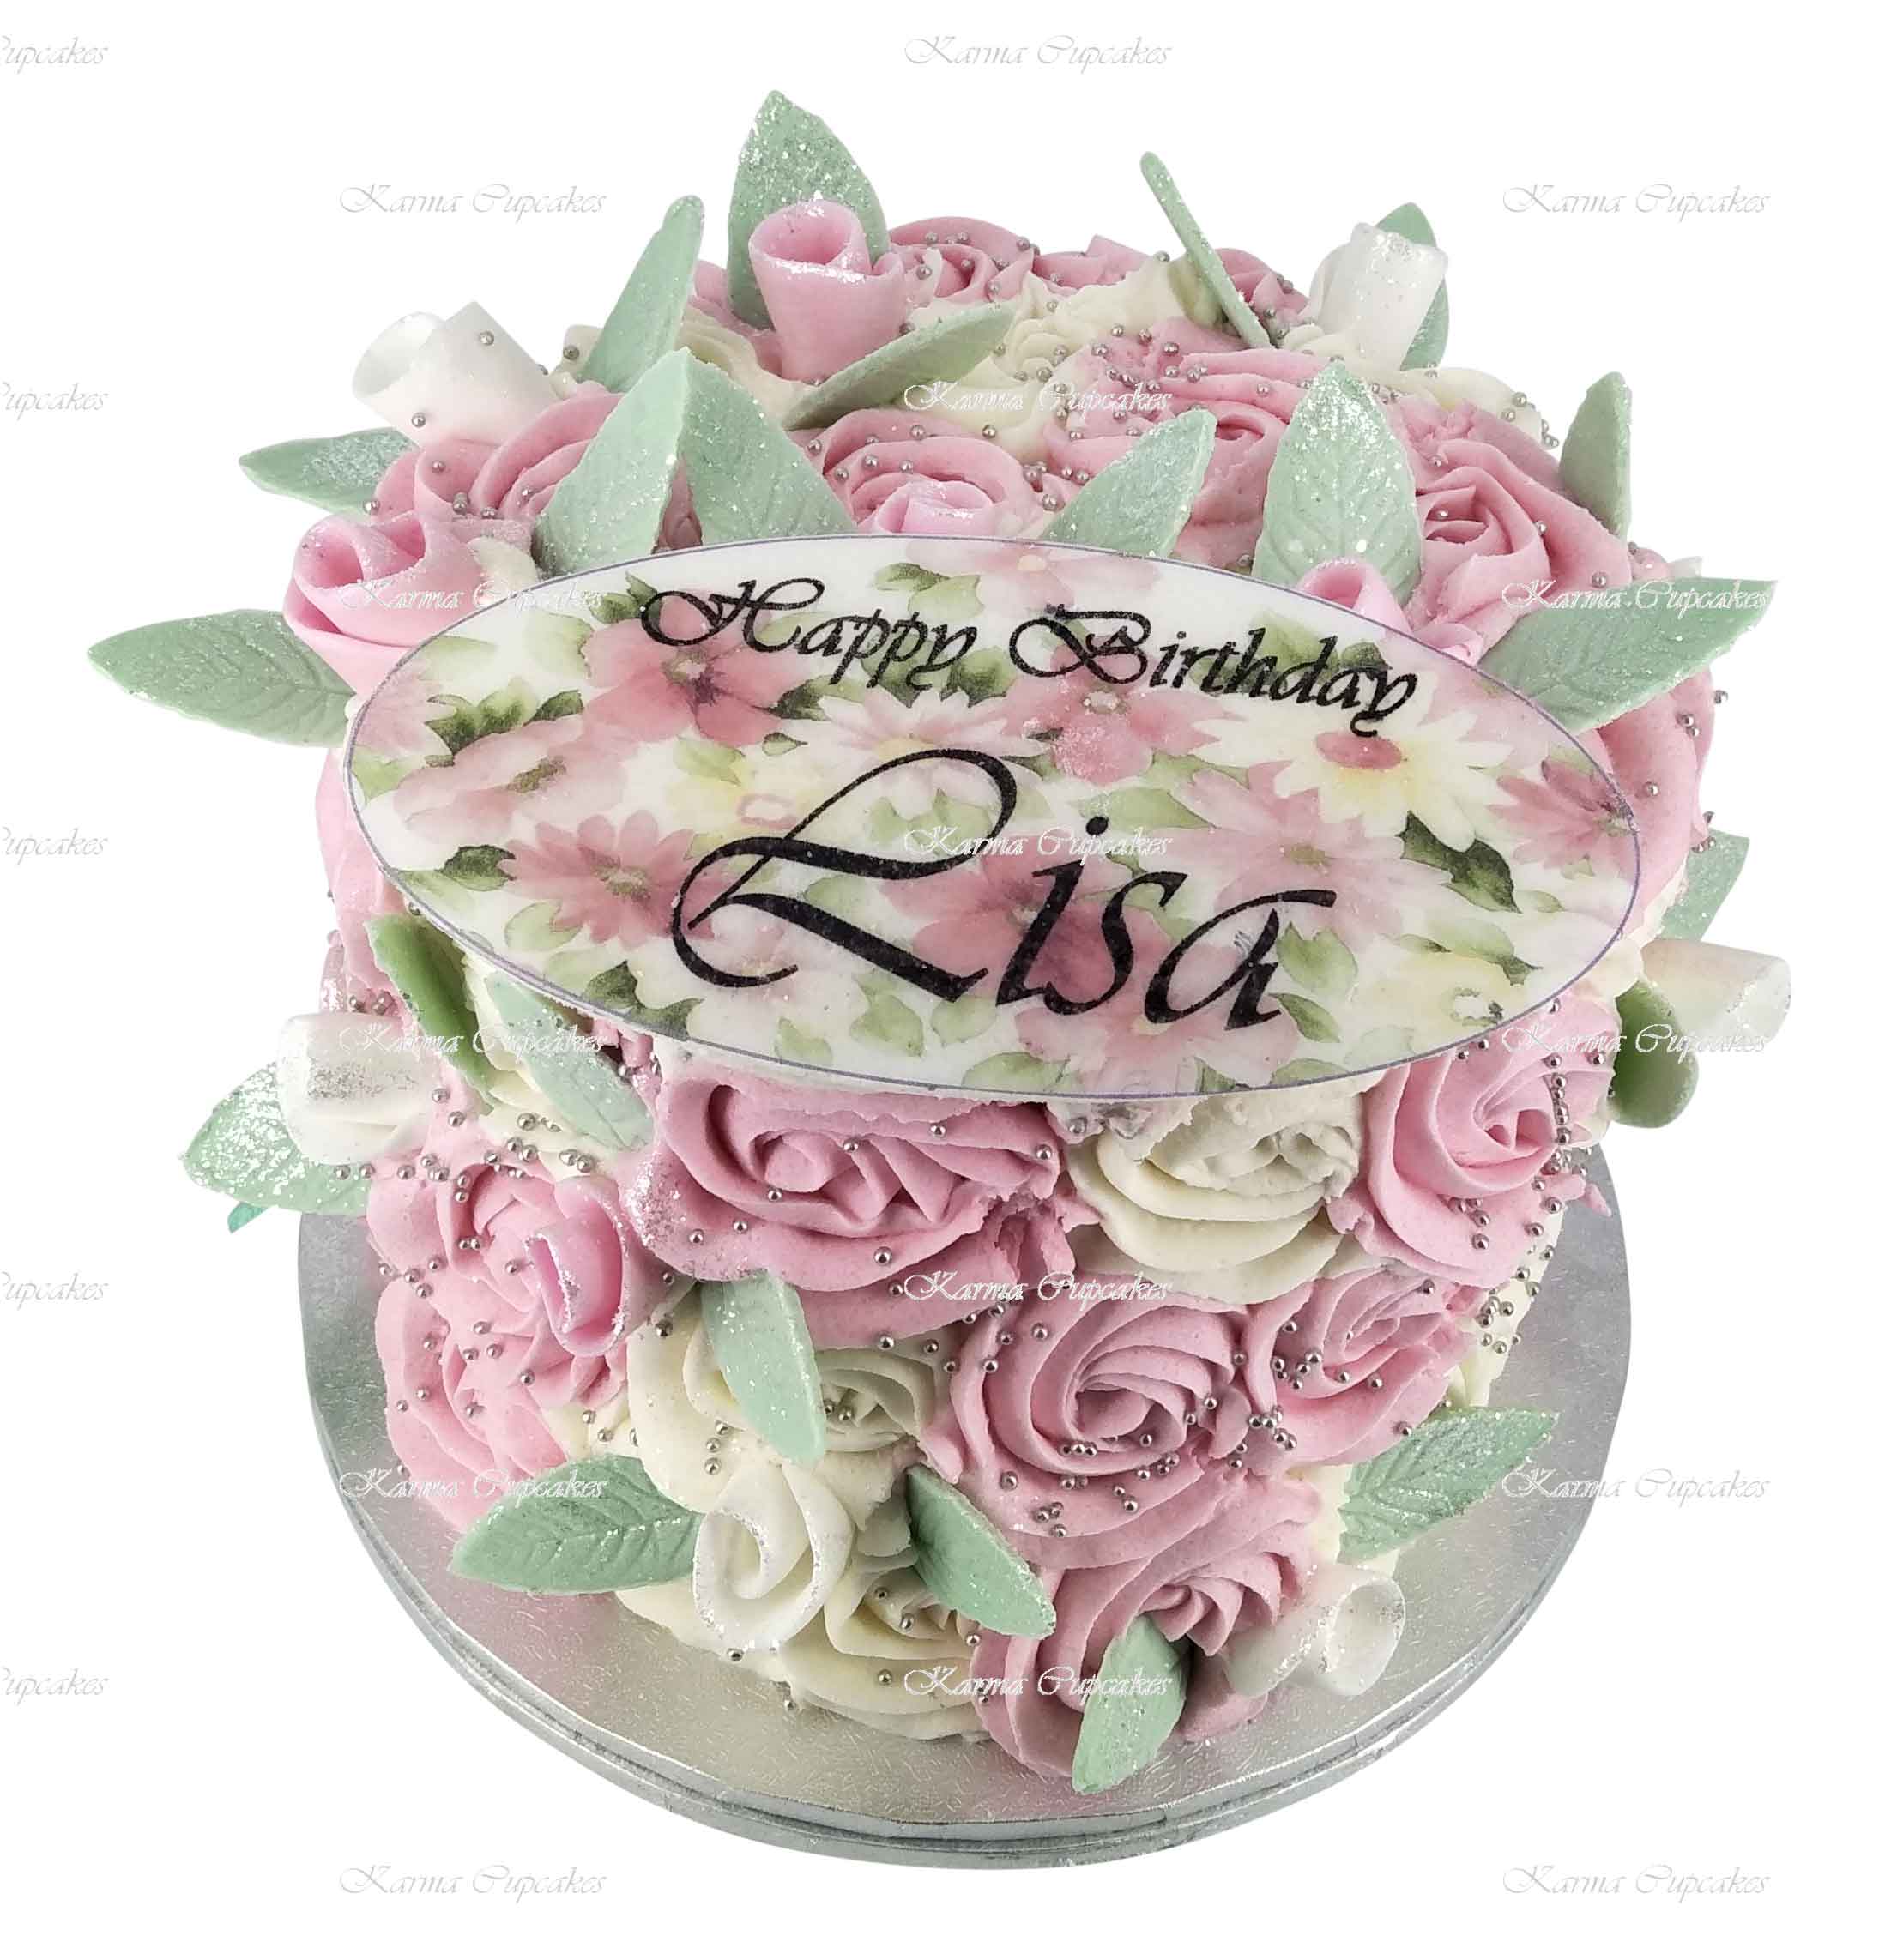 Pink-and-white-rose-swirl-cake-with-edible-name-plaque-Happy-Birthday-Lisa-(2)